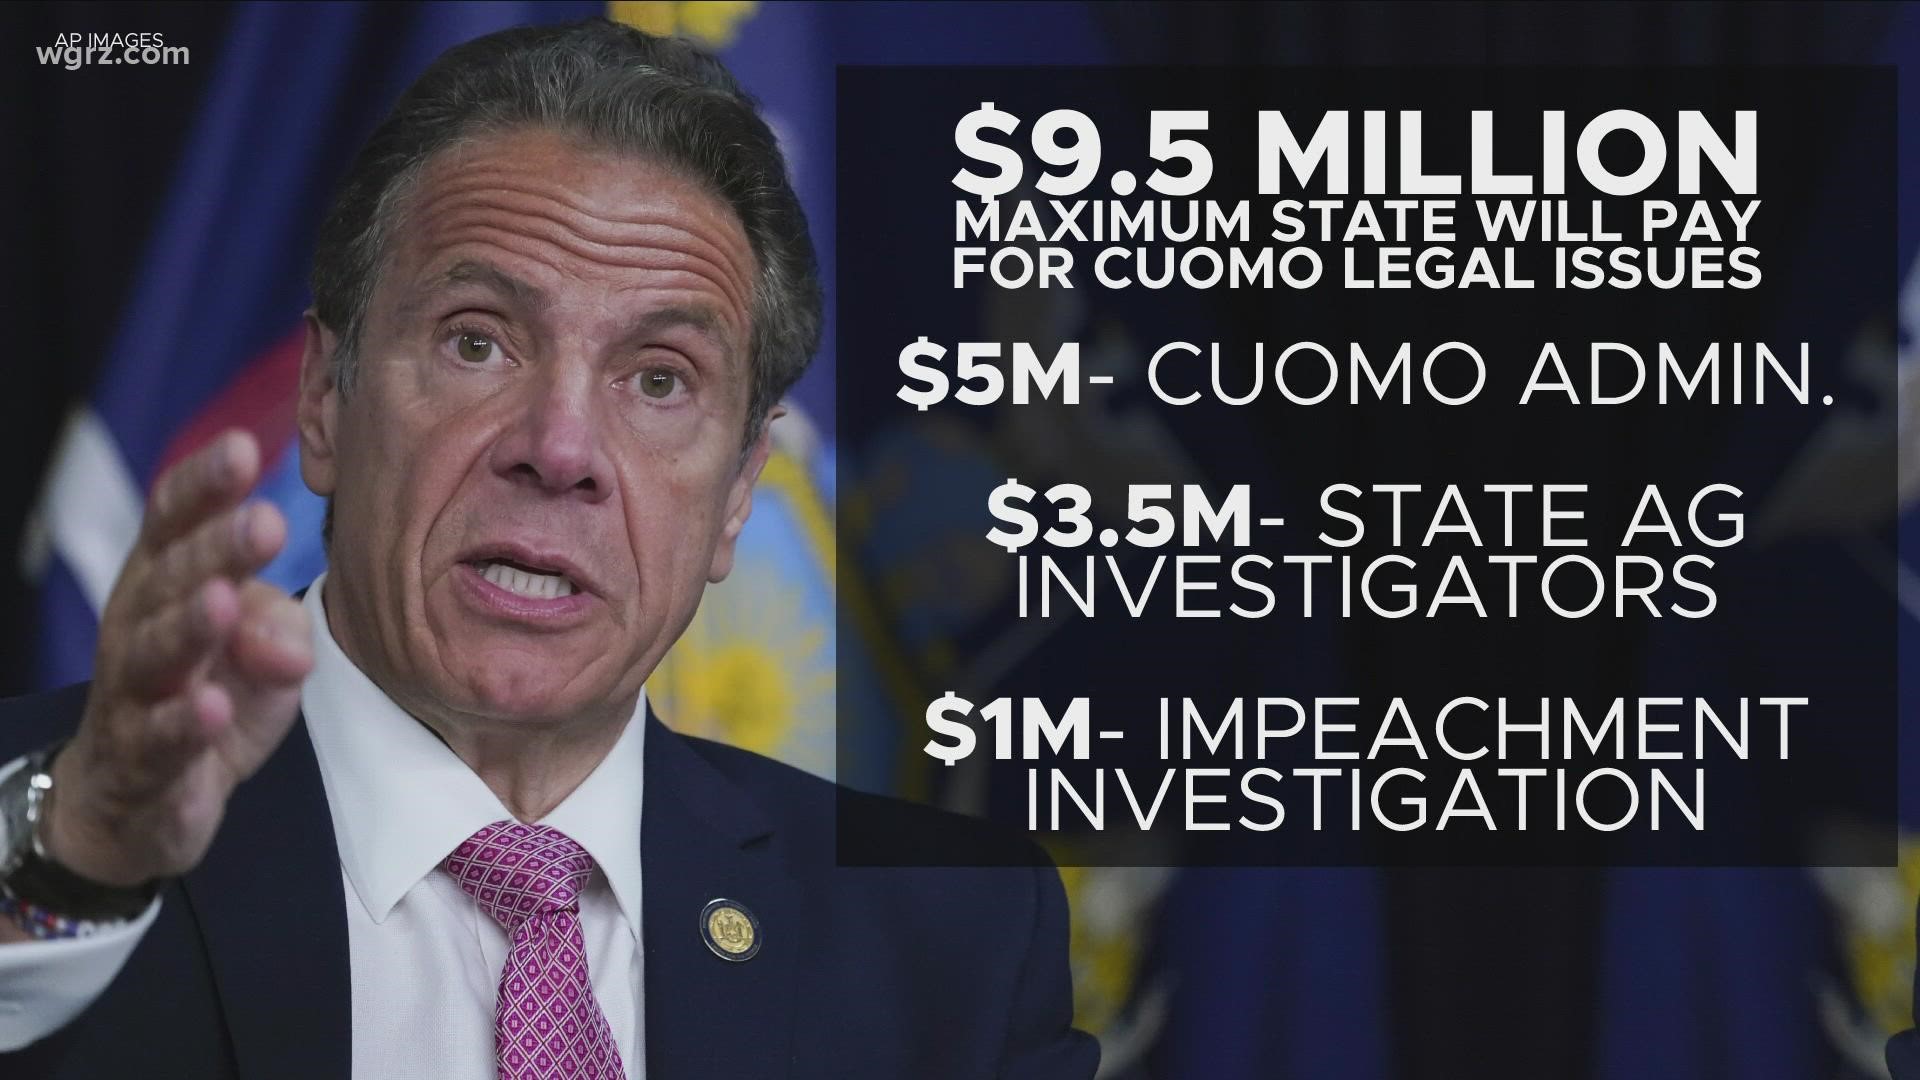 The state has already agreed to pay up to $9.5 million to lawyers representing and investigating Cuomo and his administration over sexual harassment allegations.